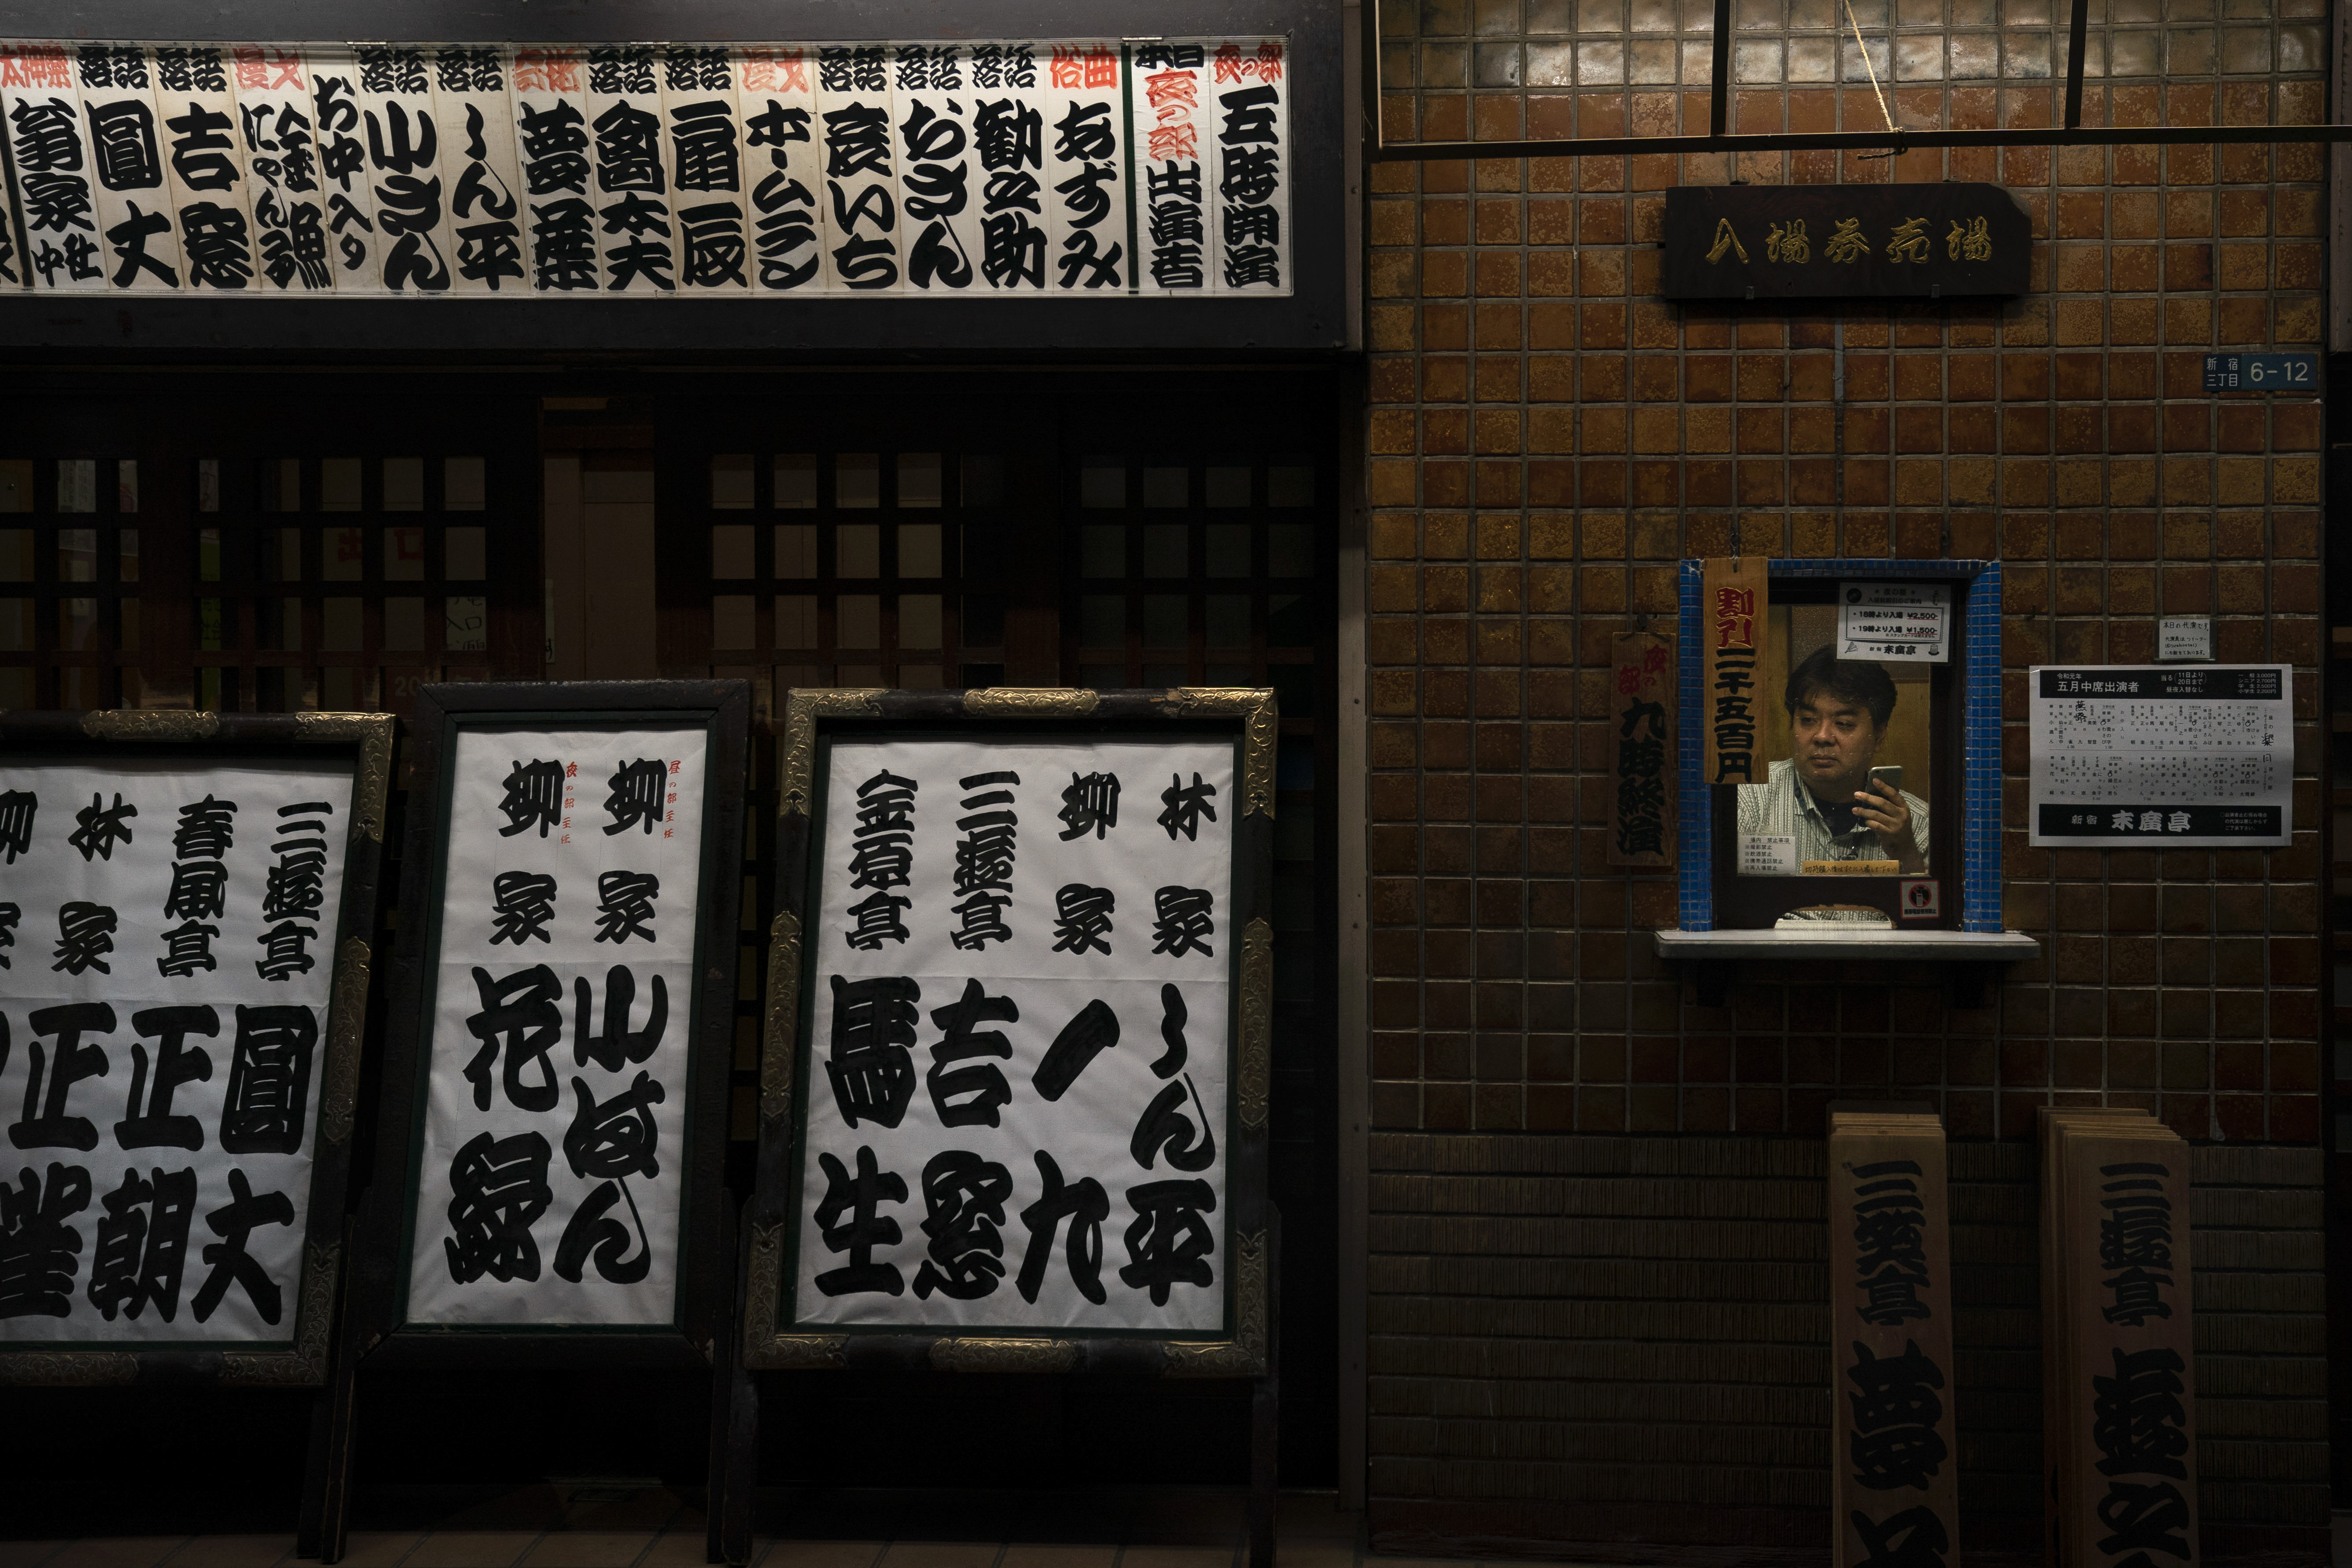 An employee sits in a ticket booth at Suehirotei yose, an entertainment hall where traditional Japanese storytelling called rakugo is performed, Monday, May 20, 2019, in Shinjuku district in Tokyo. (AP Photo/Jae C. Hong)